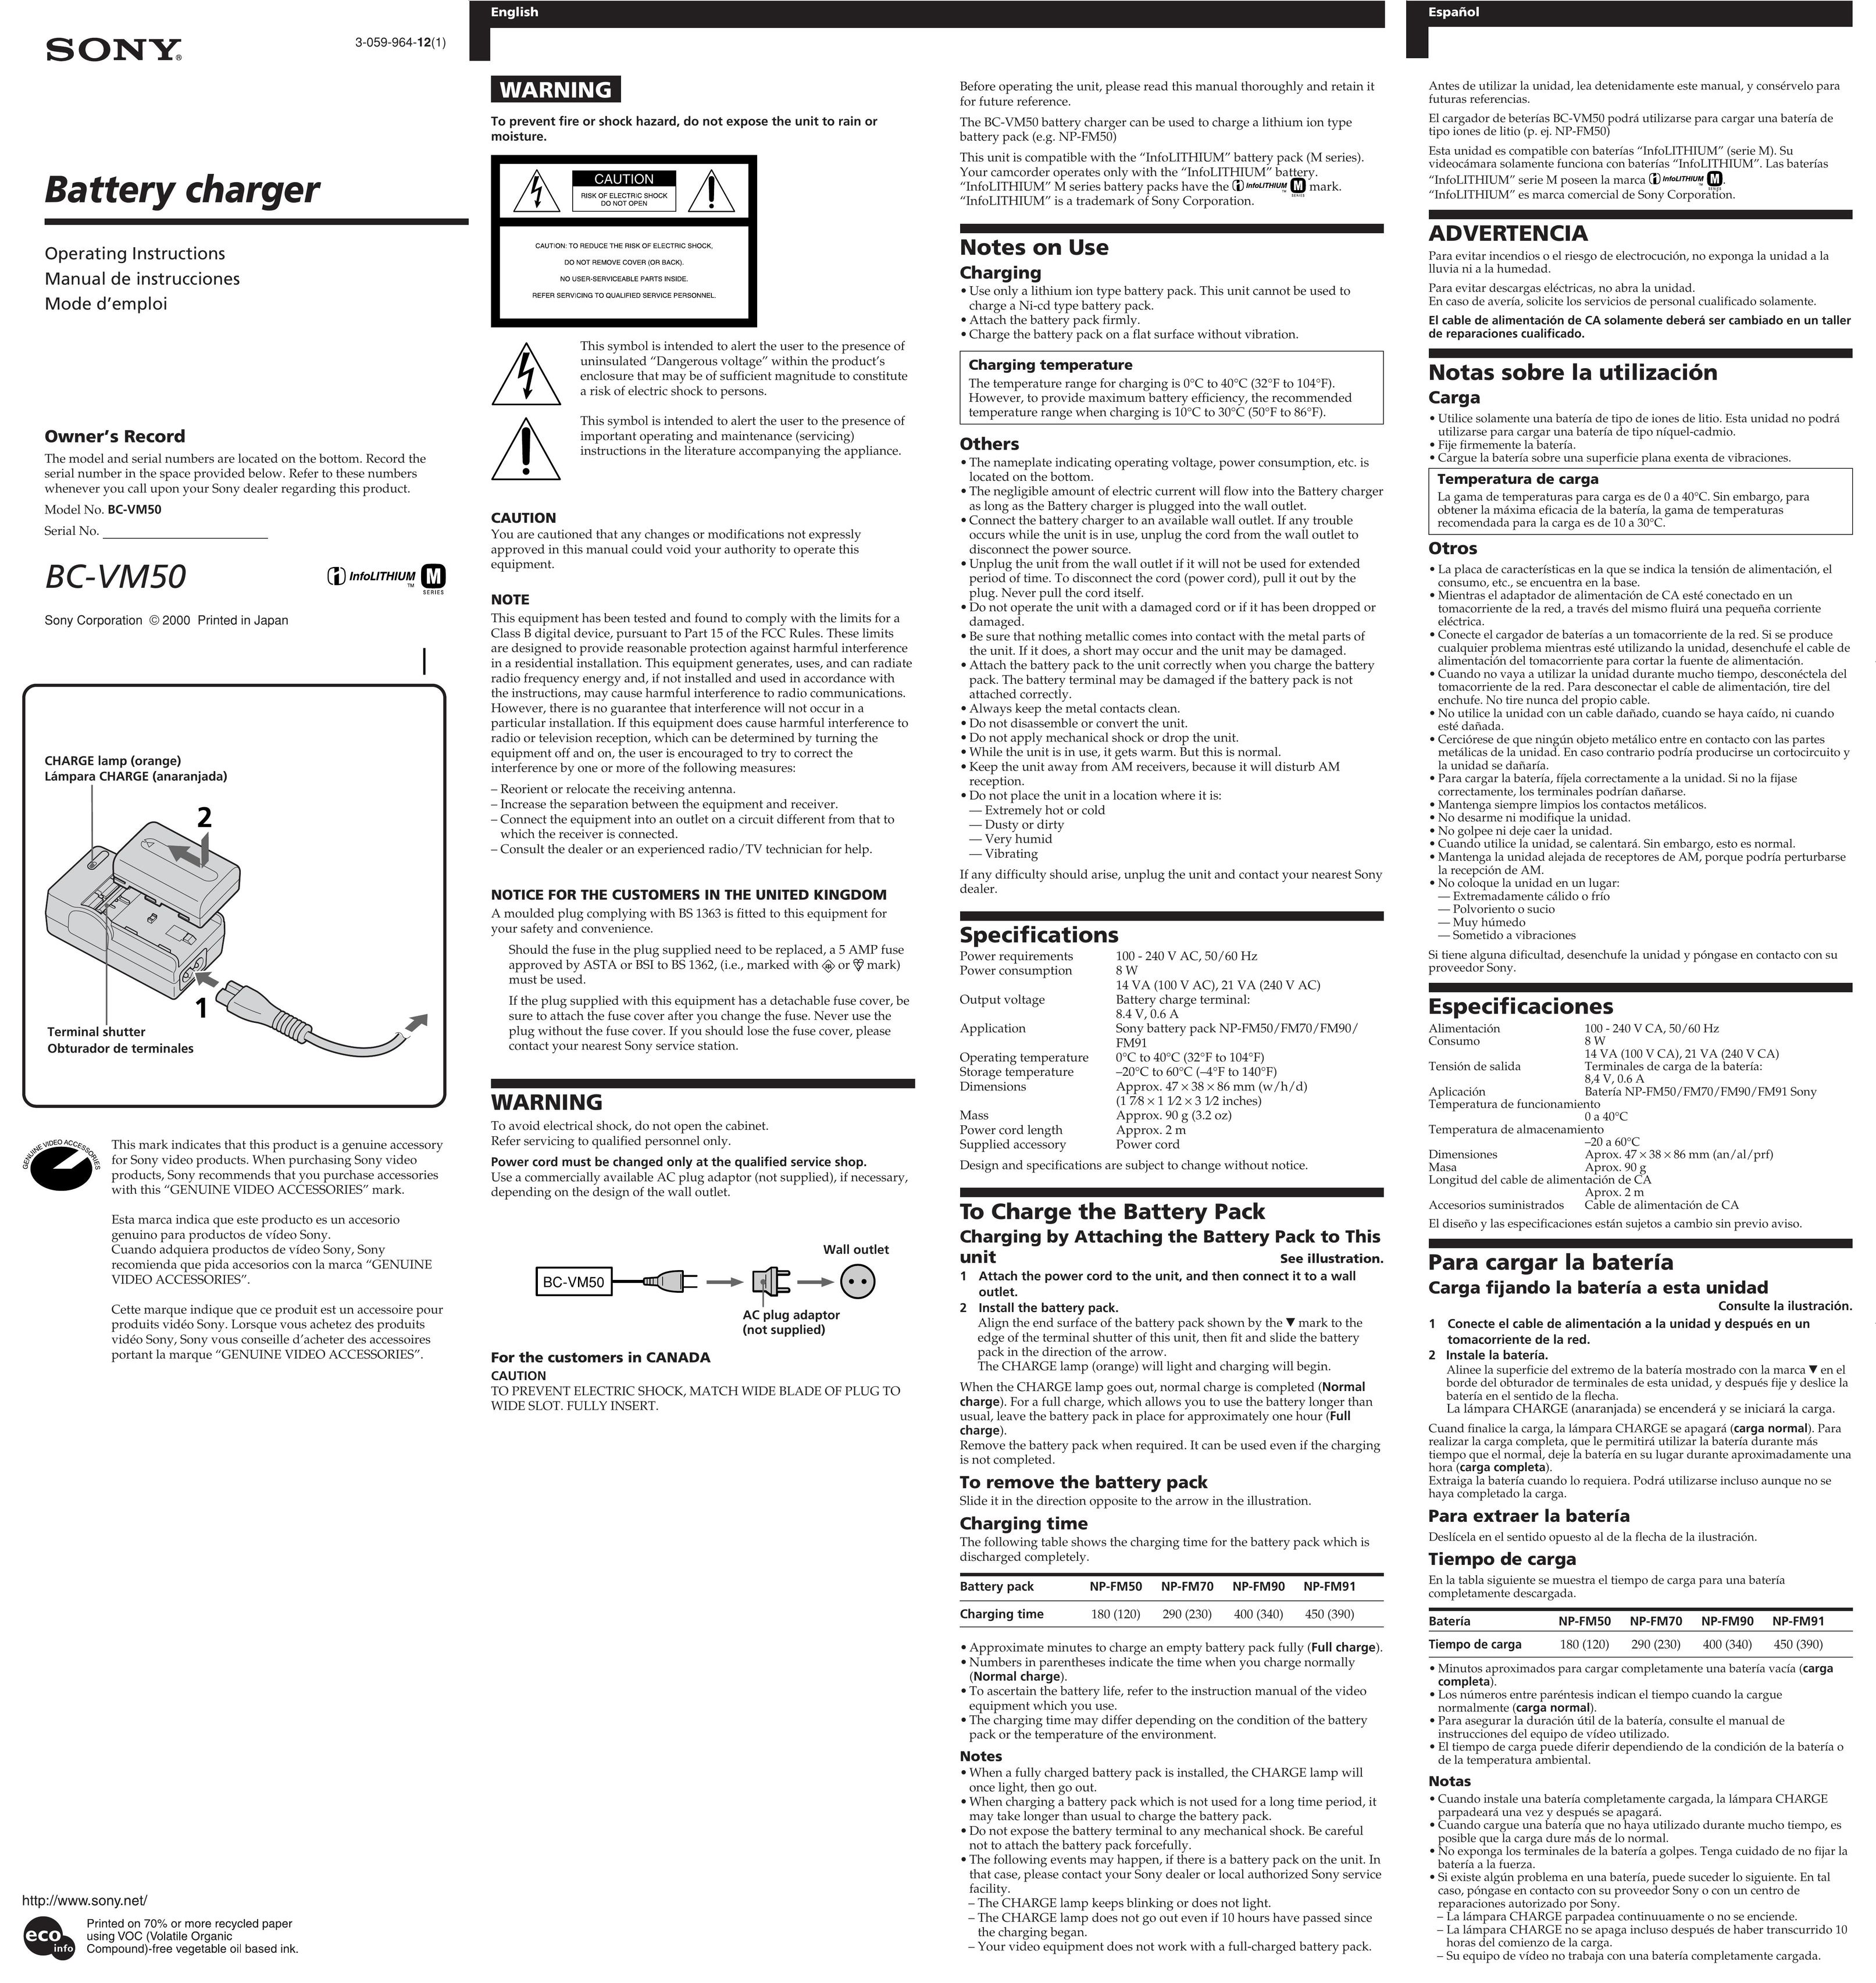 Sony BC VM50 Battery Charger User Manual